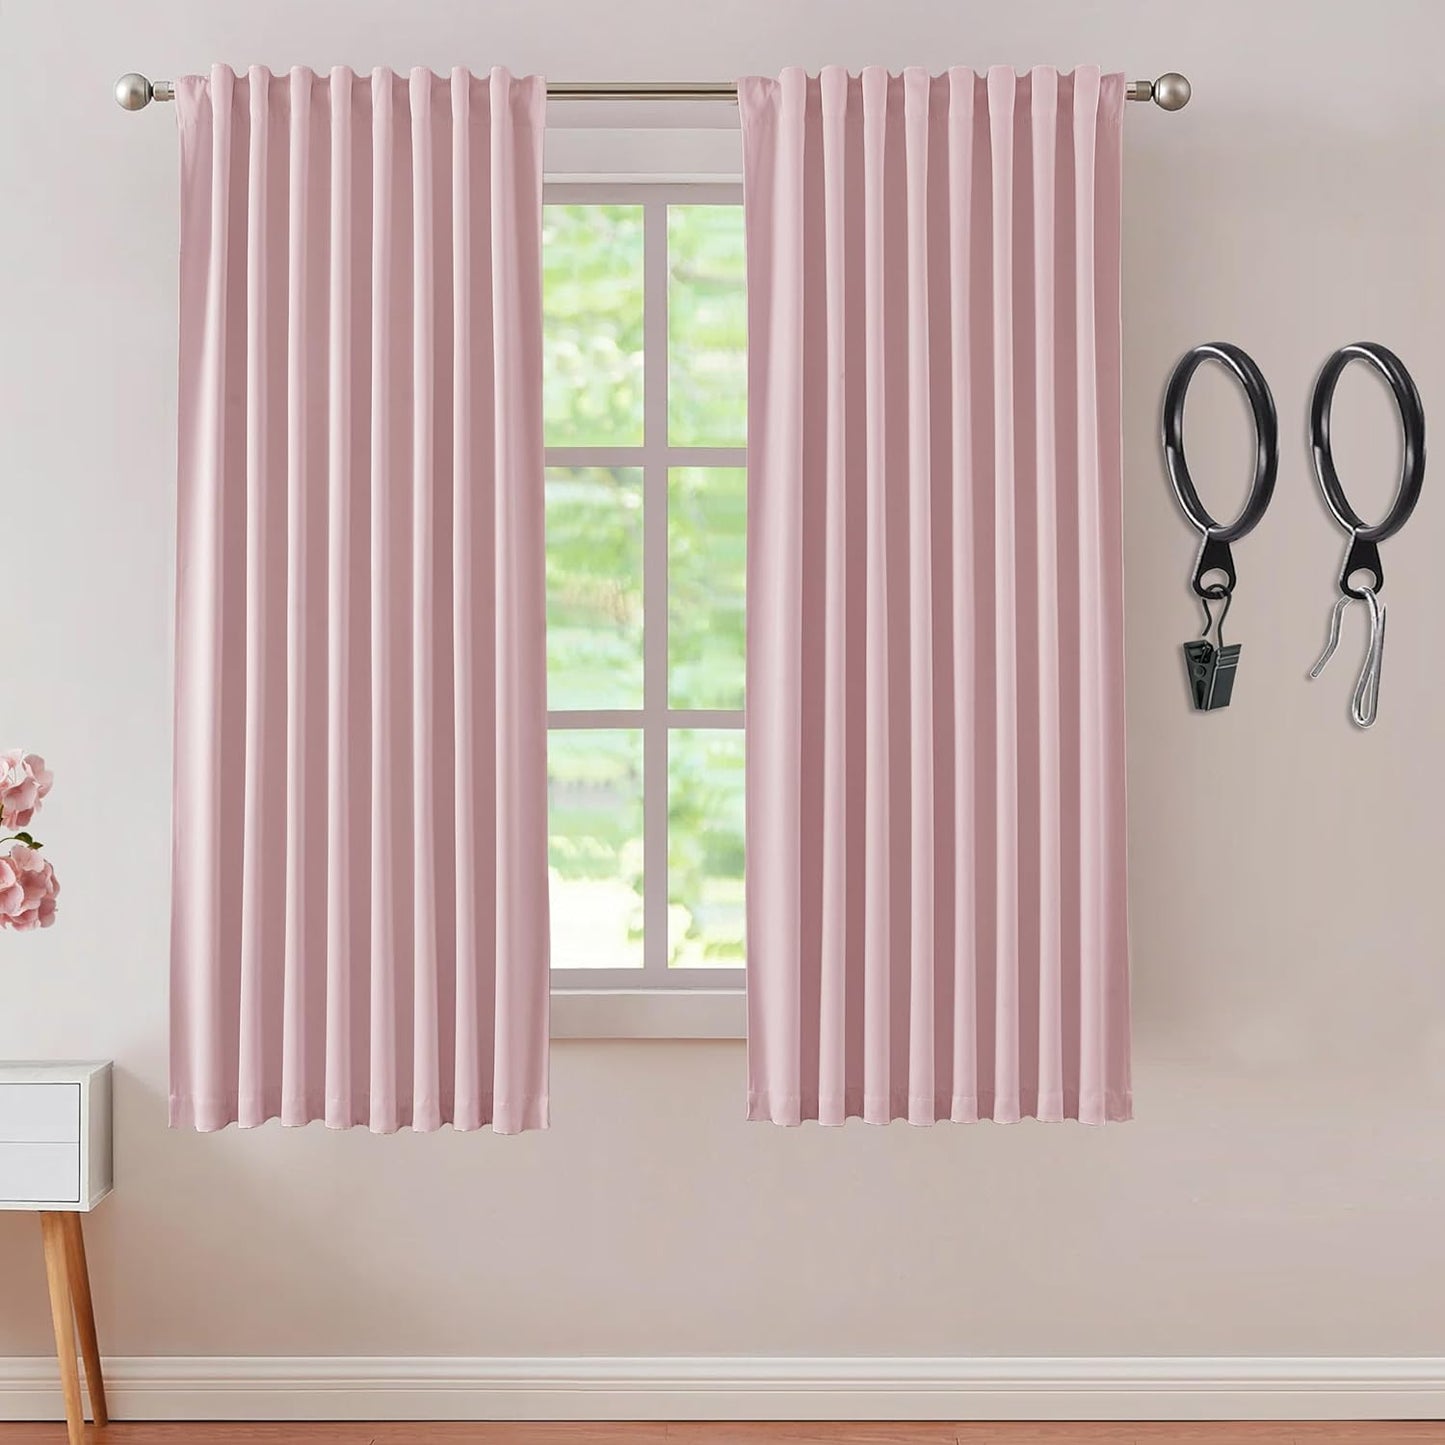 SHINELAND Beige Room Darkening Curtains 105 Inches Long for Living Room Bedroom,Cortinas Para Cuarto Bloqueador De Luz,Thermal Insulated Back Tab Pleat Blackout Curtains for Sunroom Patio Door Indoor  SHINELAND Pink 2X(52"Wx63"L) 